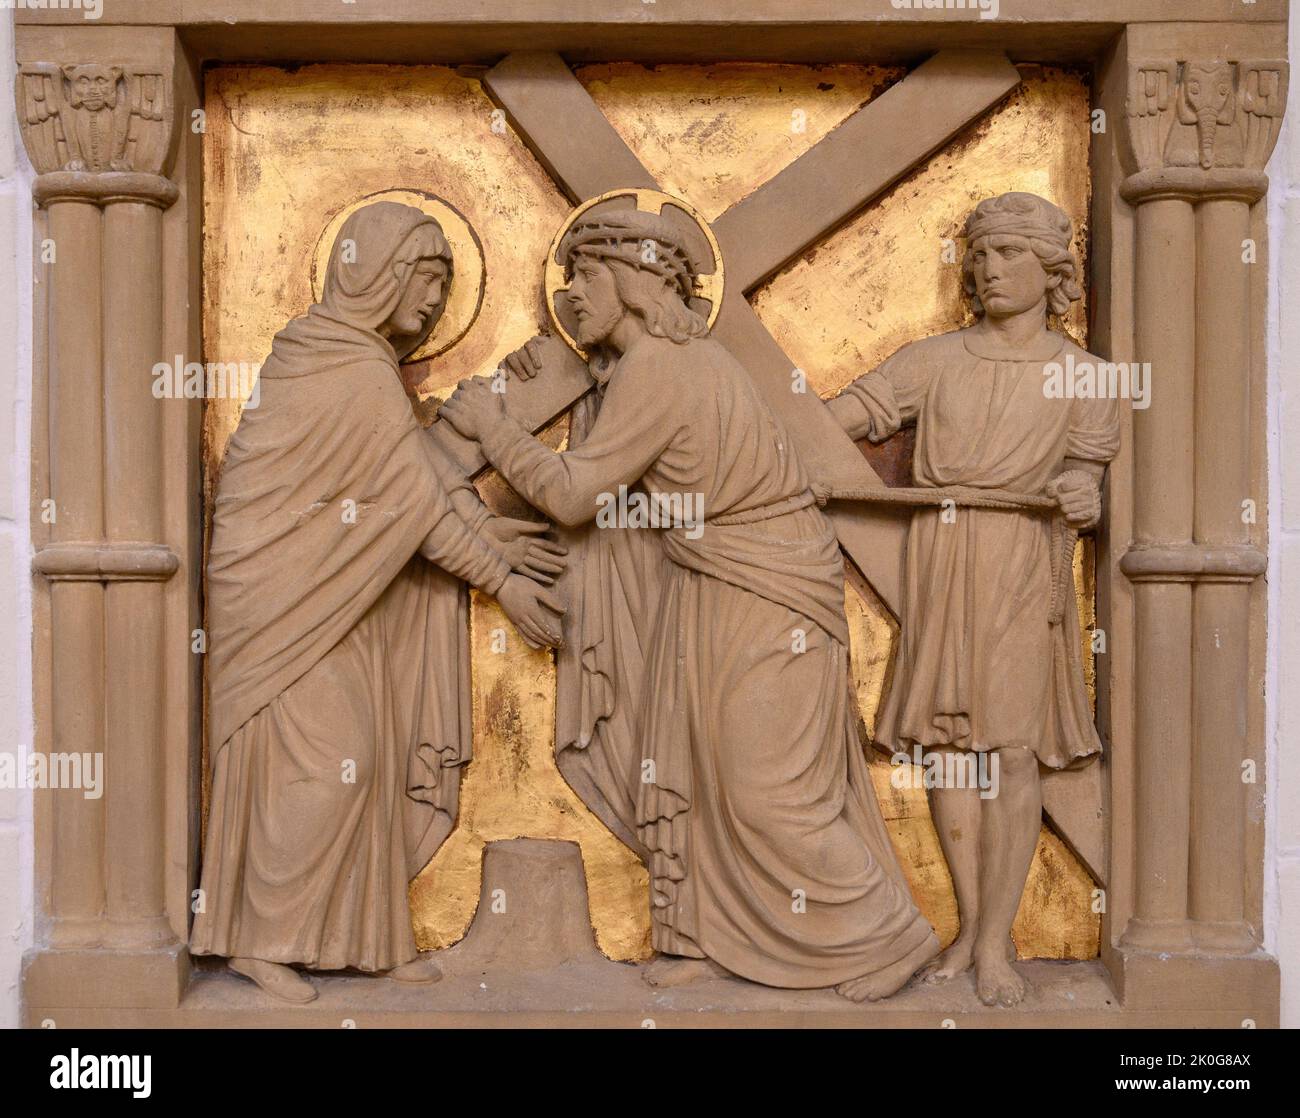 Station IV of the Way of the Cross: Jesus meets his Mother. The Church of Saints Cosmas & Damian in Clervaux, Luxembourg. Stock Photo